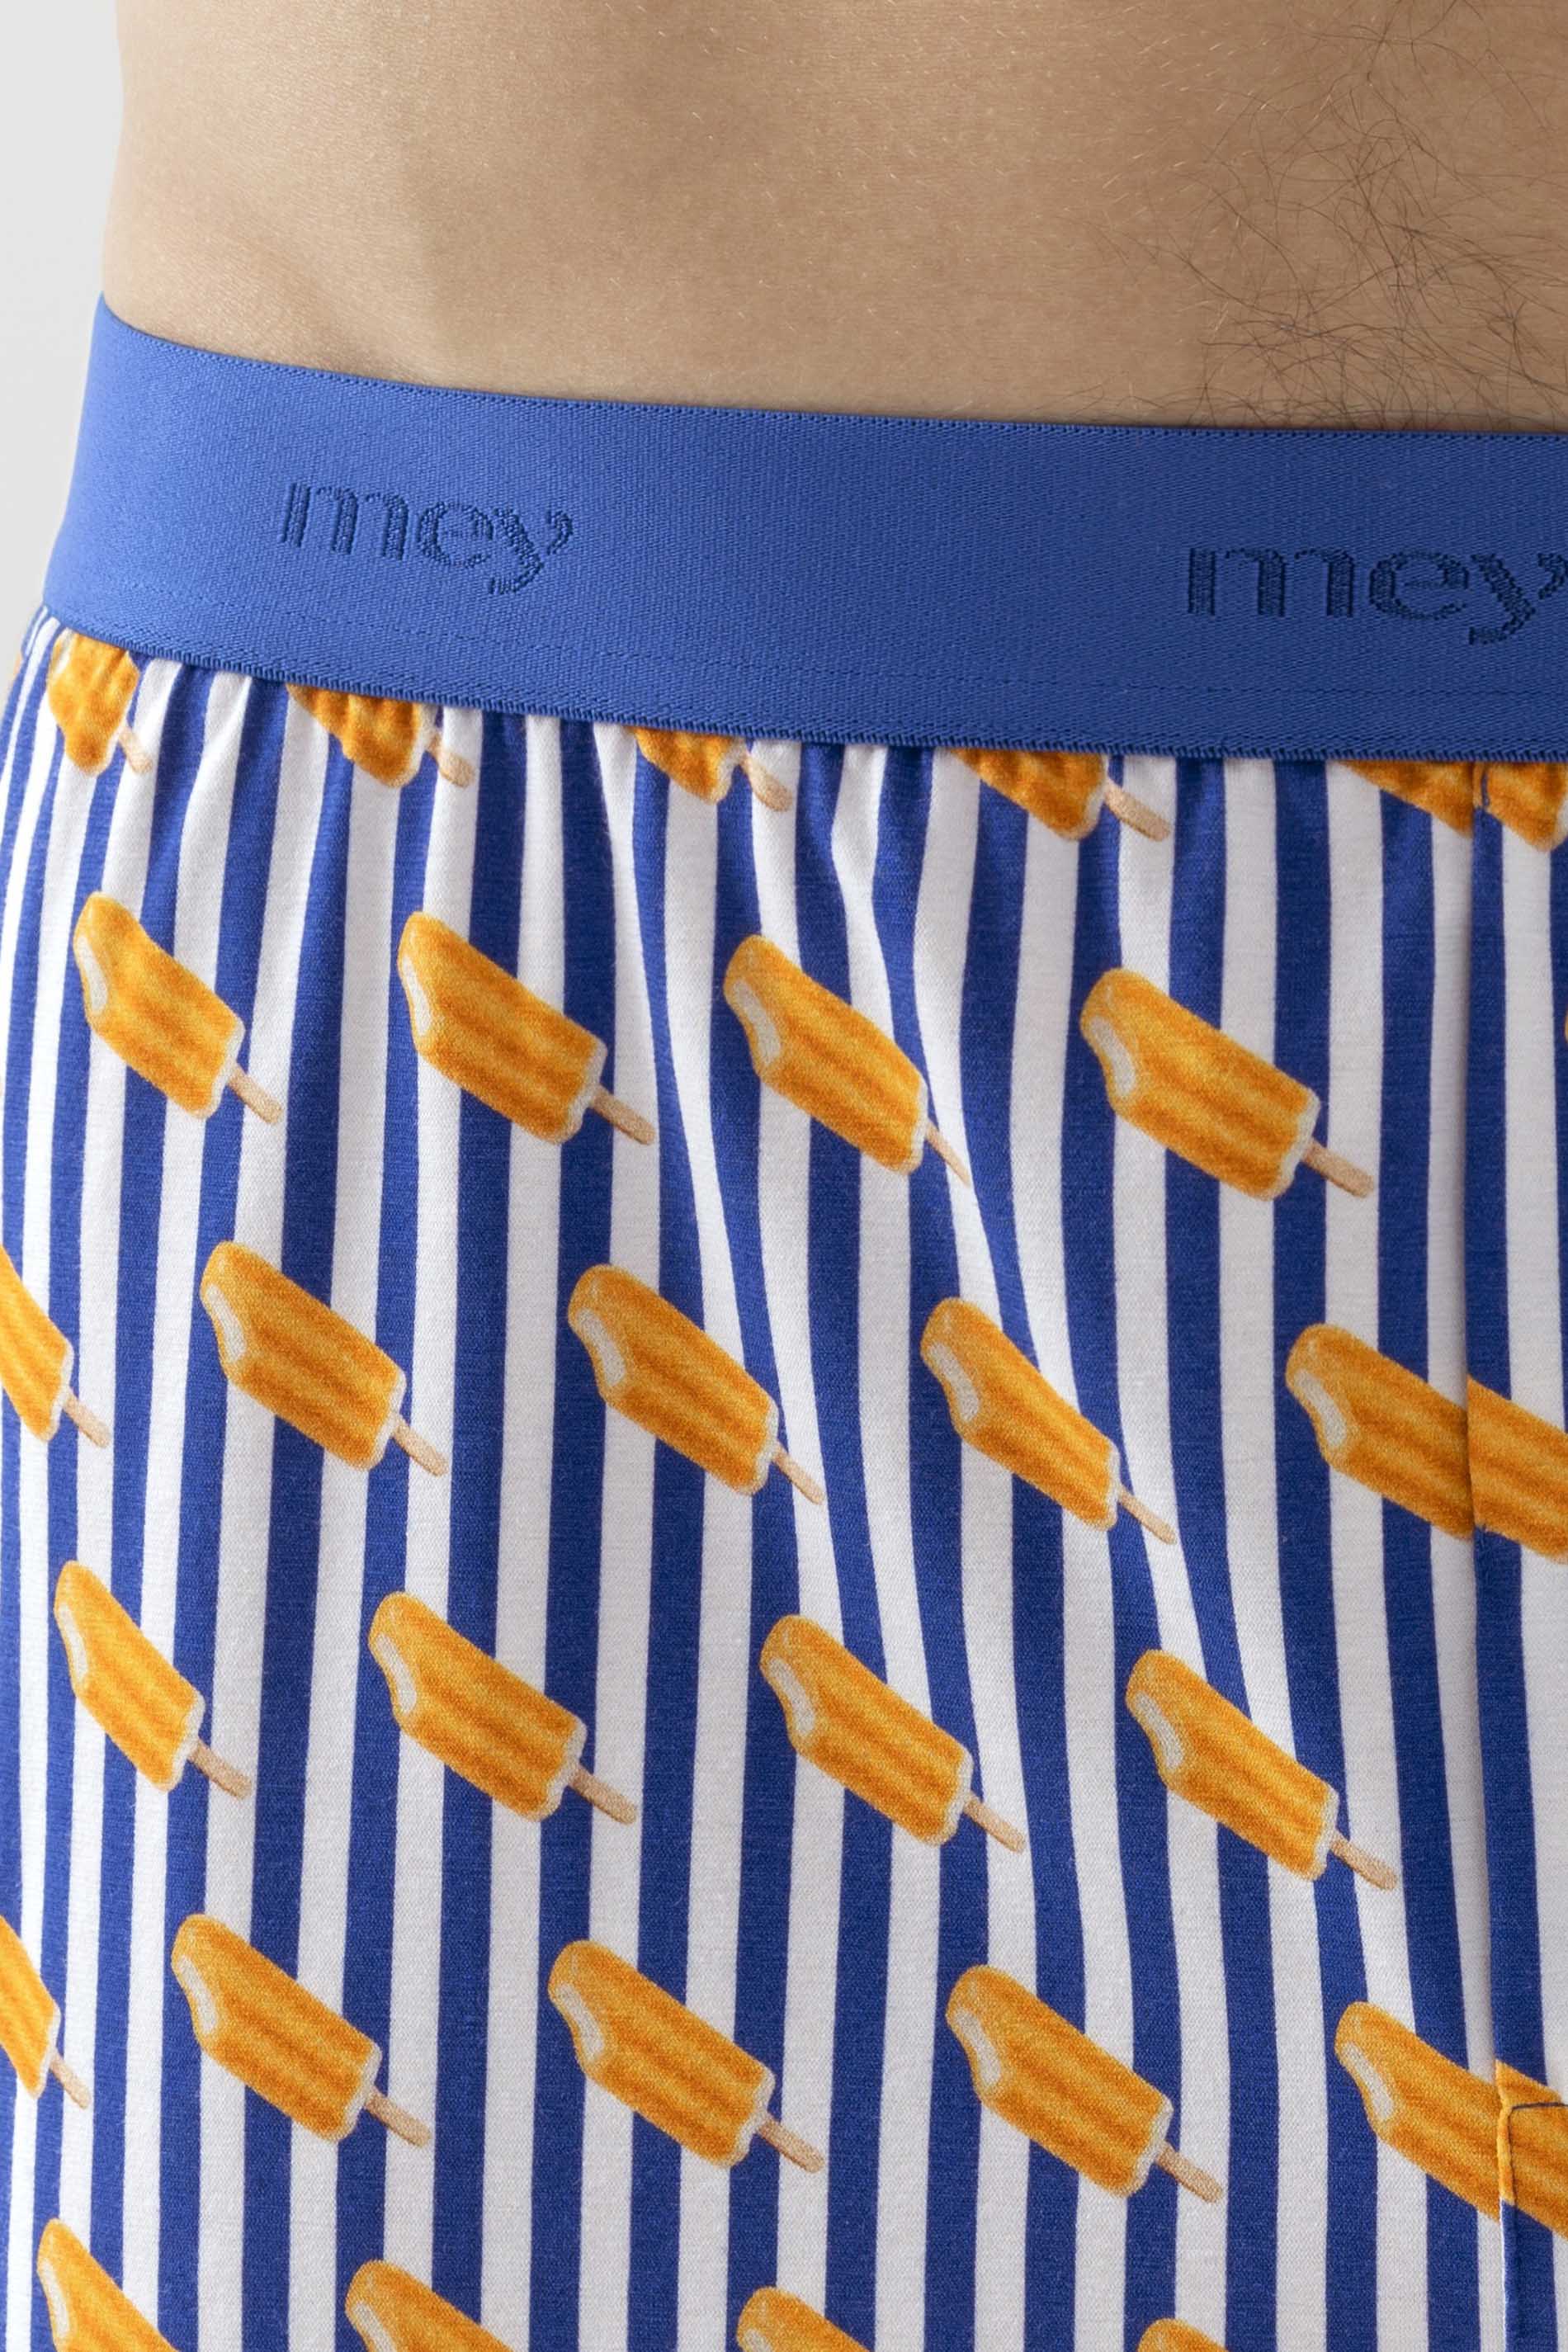 Boxer shorts Serie RE:THINK ICE Detail View 01 | mey®